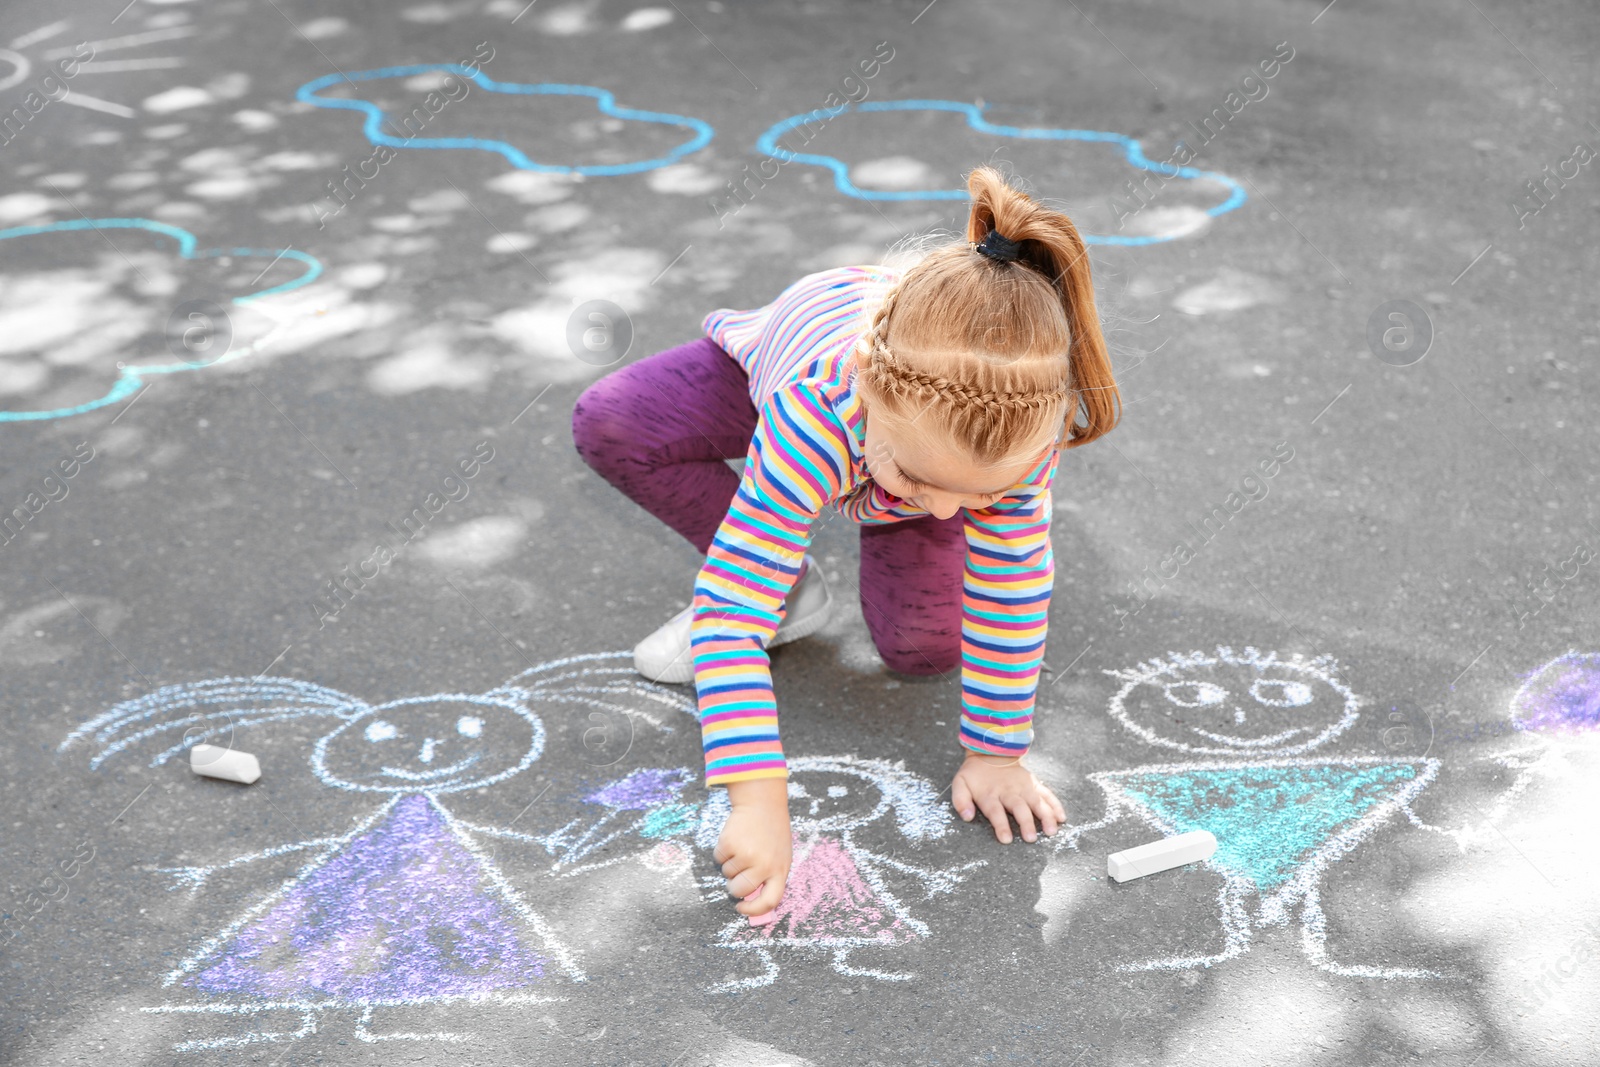 Photo of Little child drawing with colorful chalk on asphalt